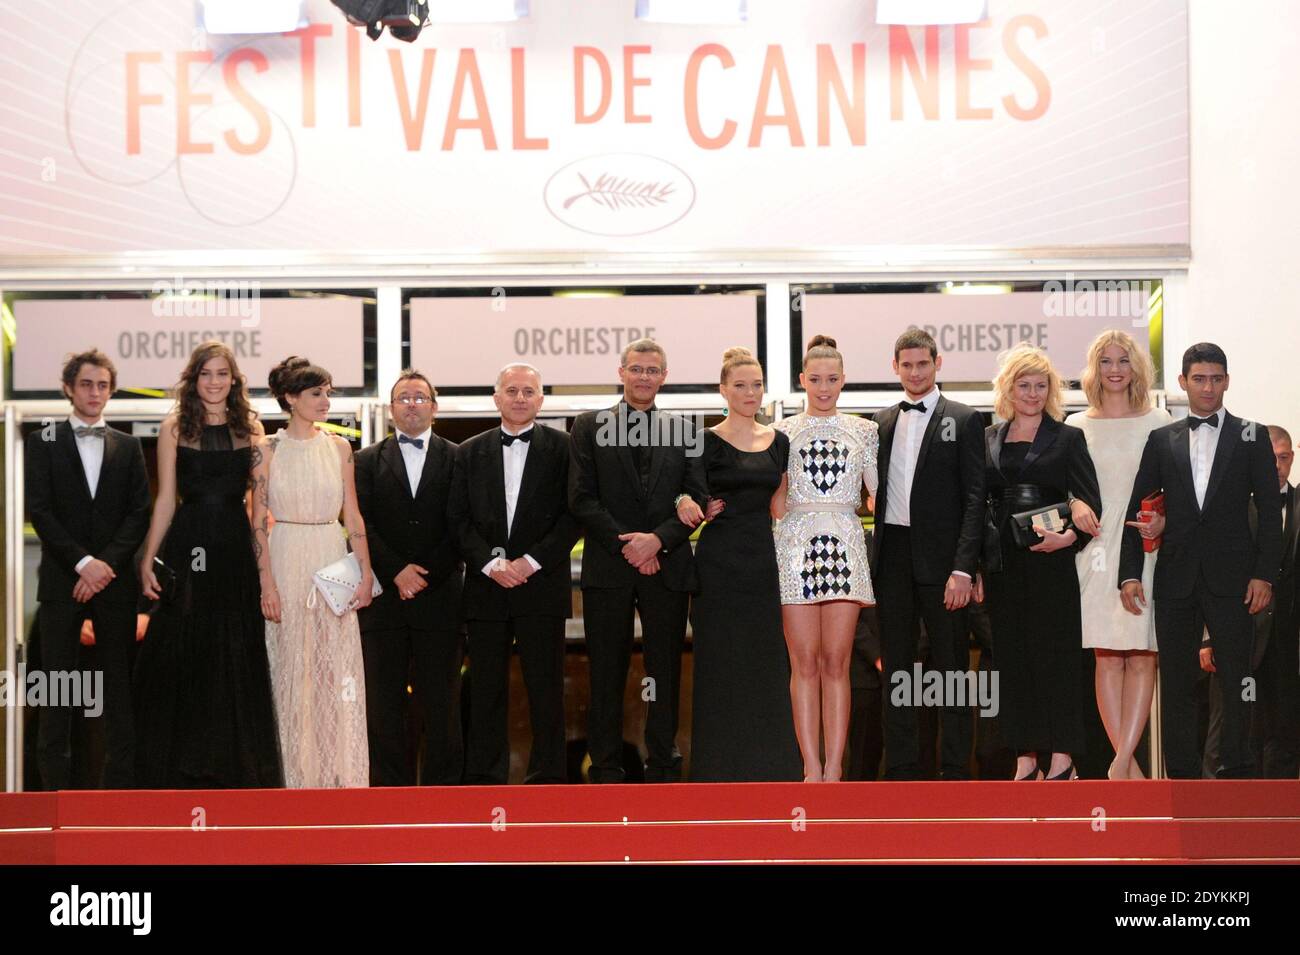 Adele Exarchopoulos, director Abdellatif Kechiche and Lea Seydoux arriving for La Vie D'Adele screening held at the Palais Des Festivals as part of the 66th Cannes Film Festival in Cannes, France on May 23, 2013. Photo by Aurore Marechal/ABACAPRESS.COM Stock Photo